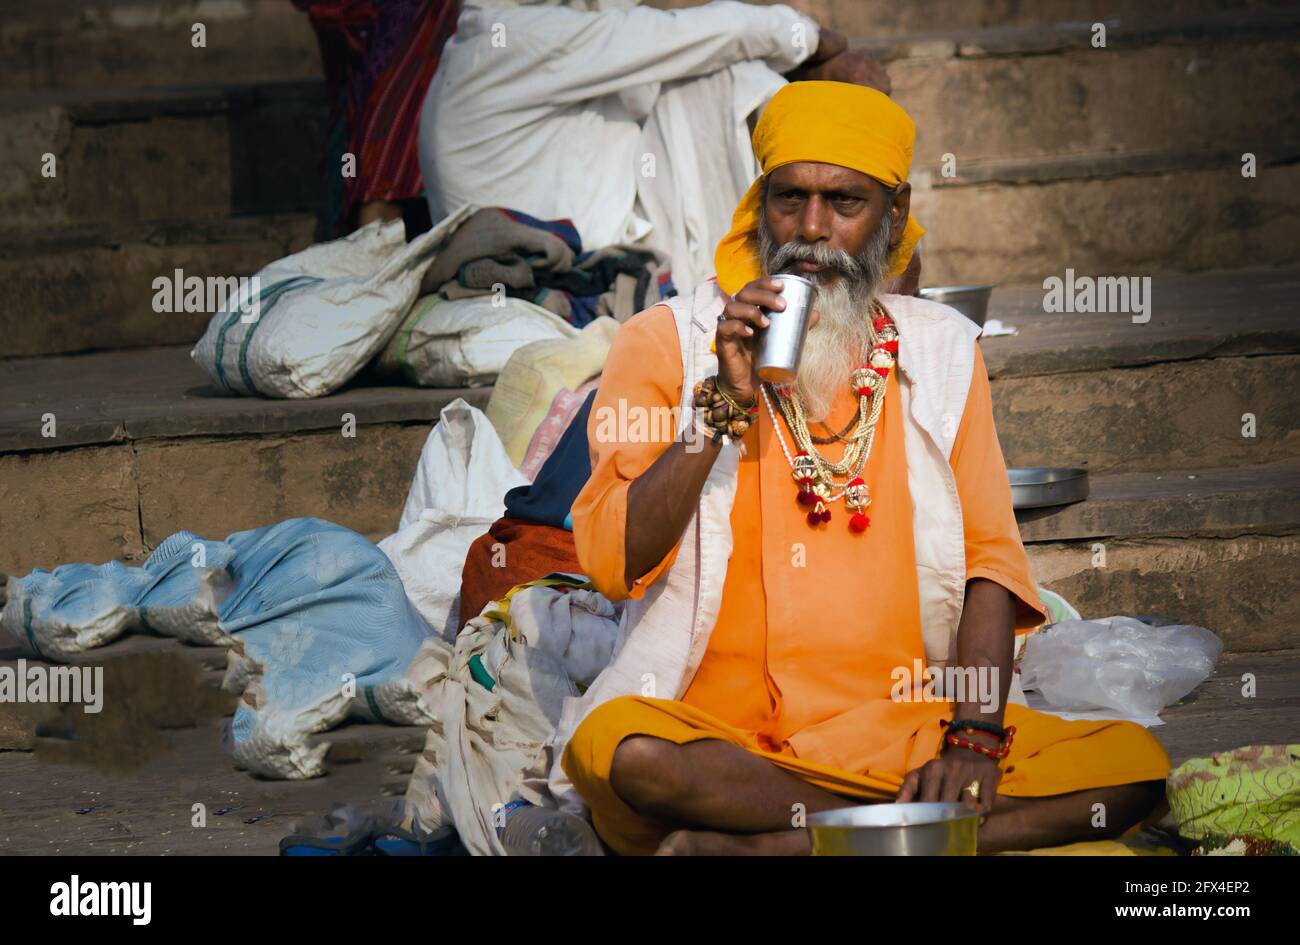 Varanasi, India - November 01, 2016: Wide angle shot of an hindu bearded sadhu, pilgrim portrait with steel glass drinking water while sitting in Hind Stock Photo